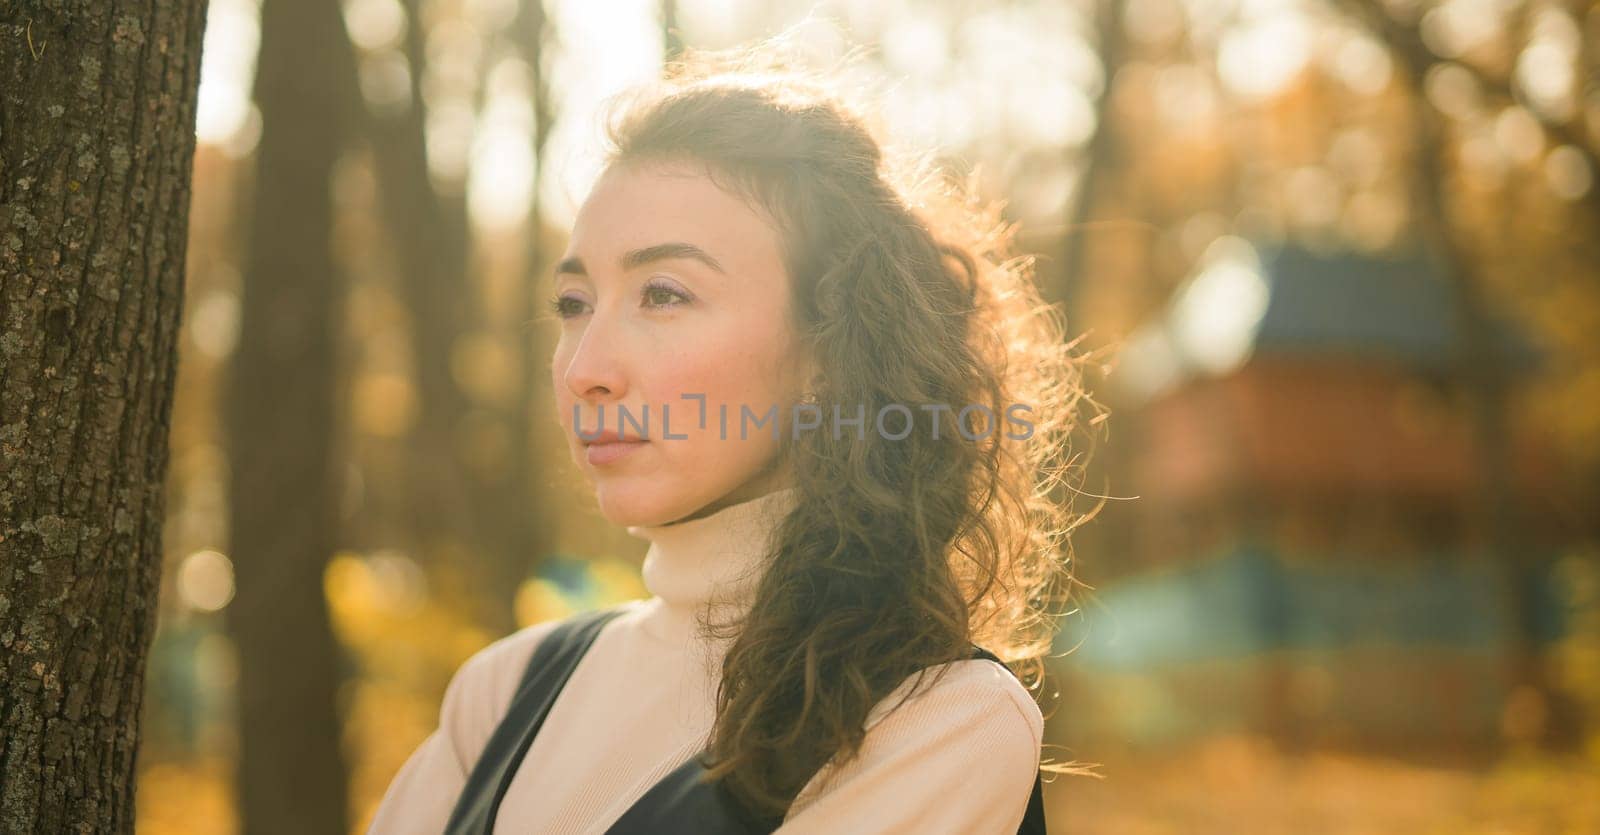 Attractive young woman walking in autumn park, happy mood and fashion style trend and curly long brown hair. Fall season and pretty female portrait. Millennial generation